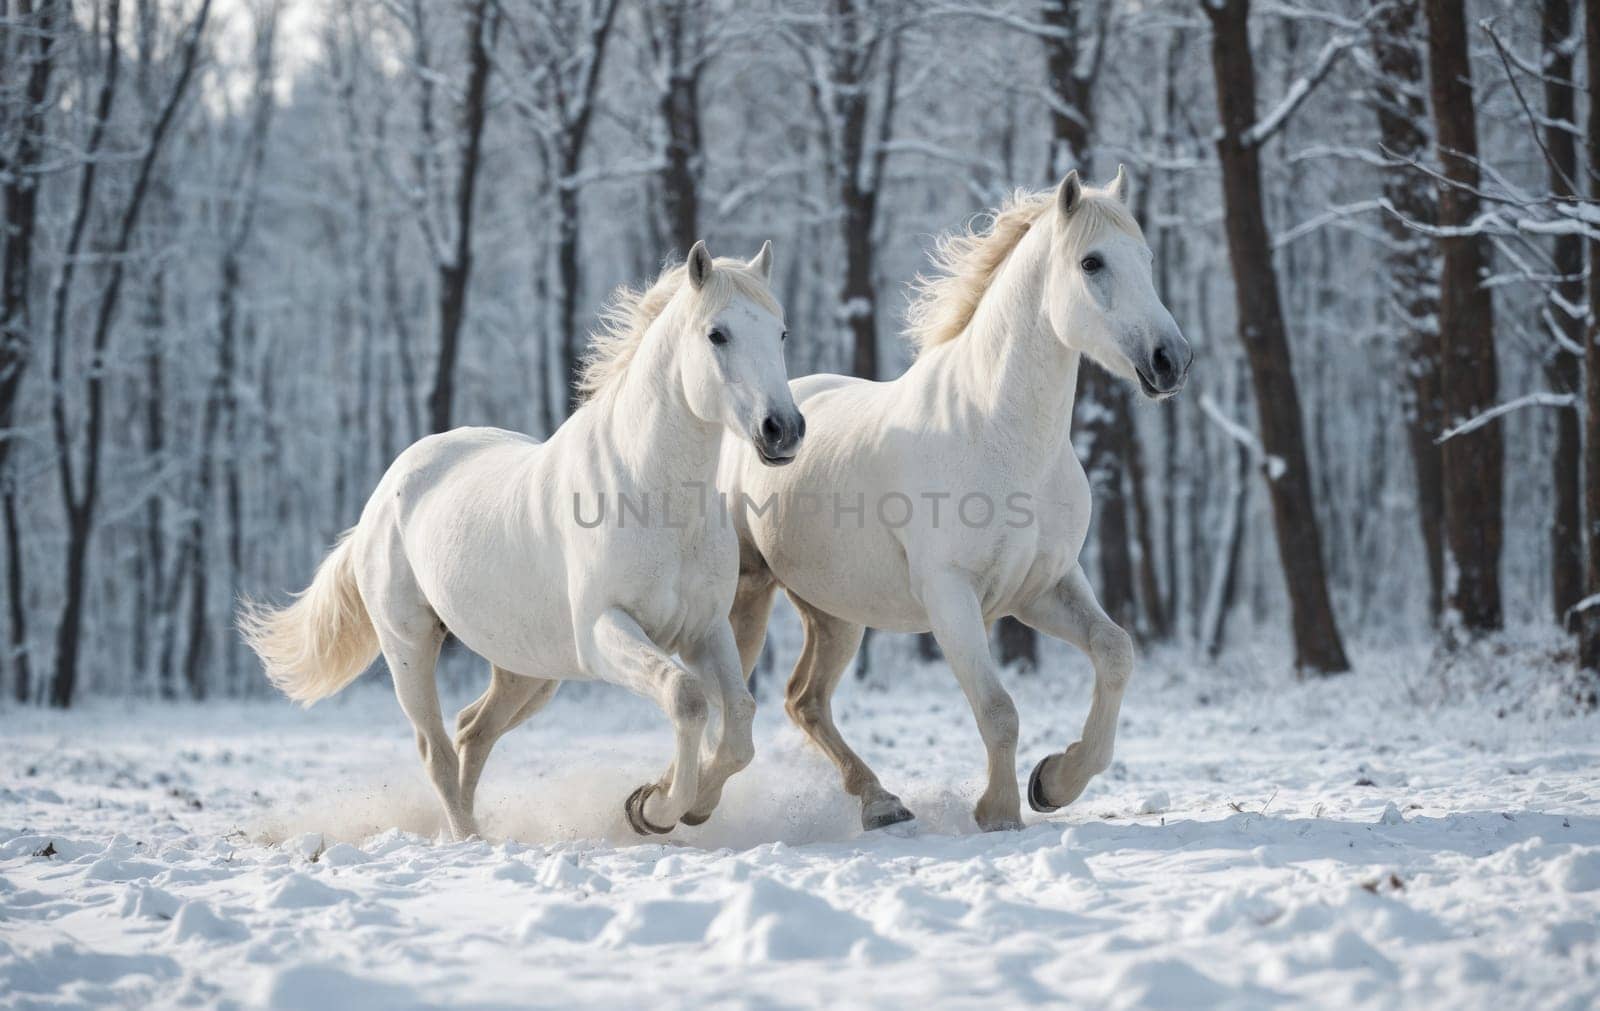 This heart-stirring image captures the splendor of two white horses galloping freely amidst a snowy backdrop. Their lively motion is a testament to the zen-like calm of a hushed winter day.